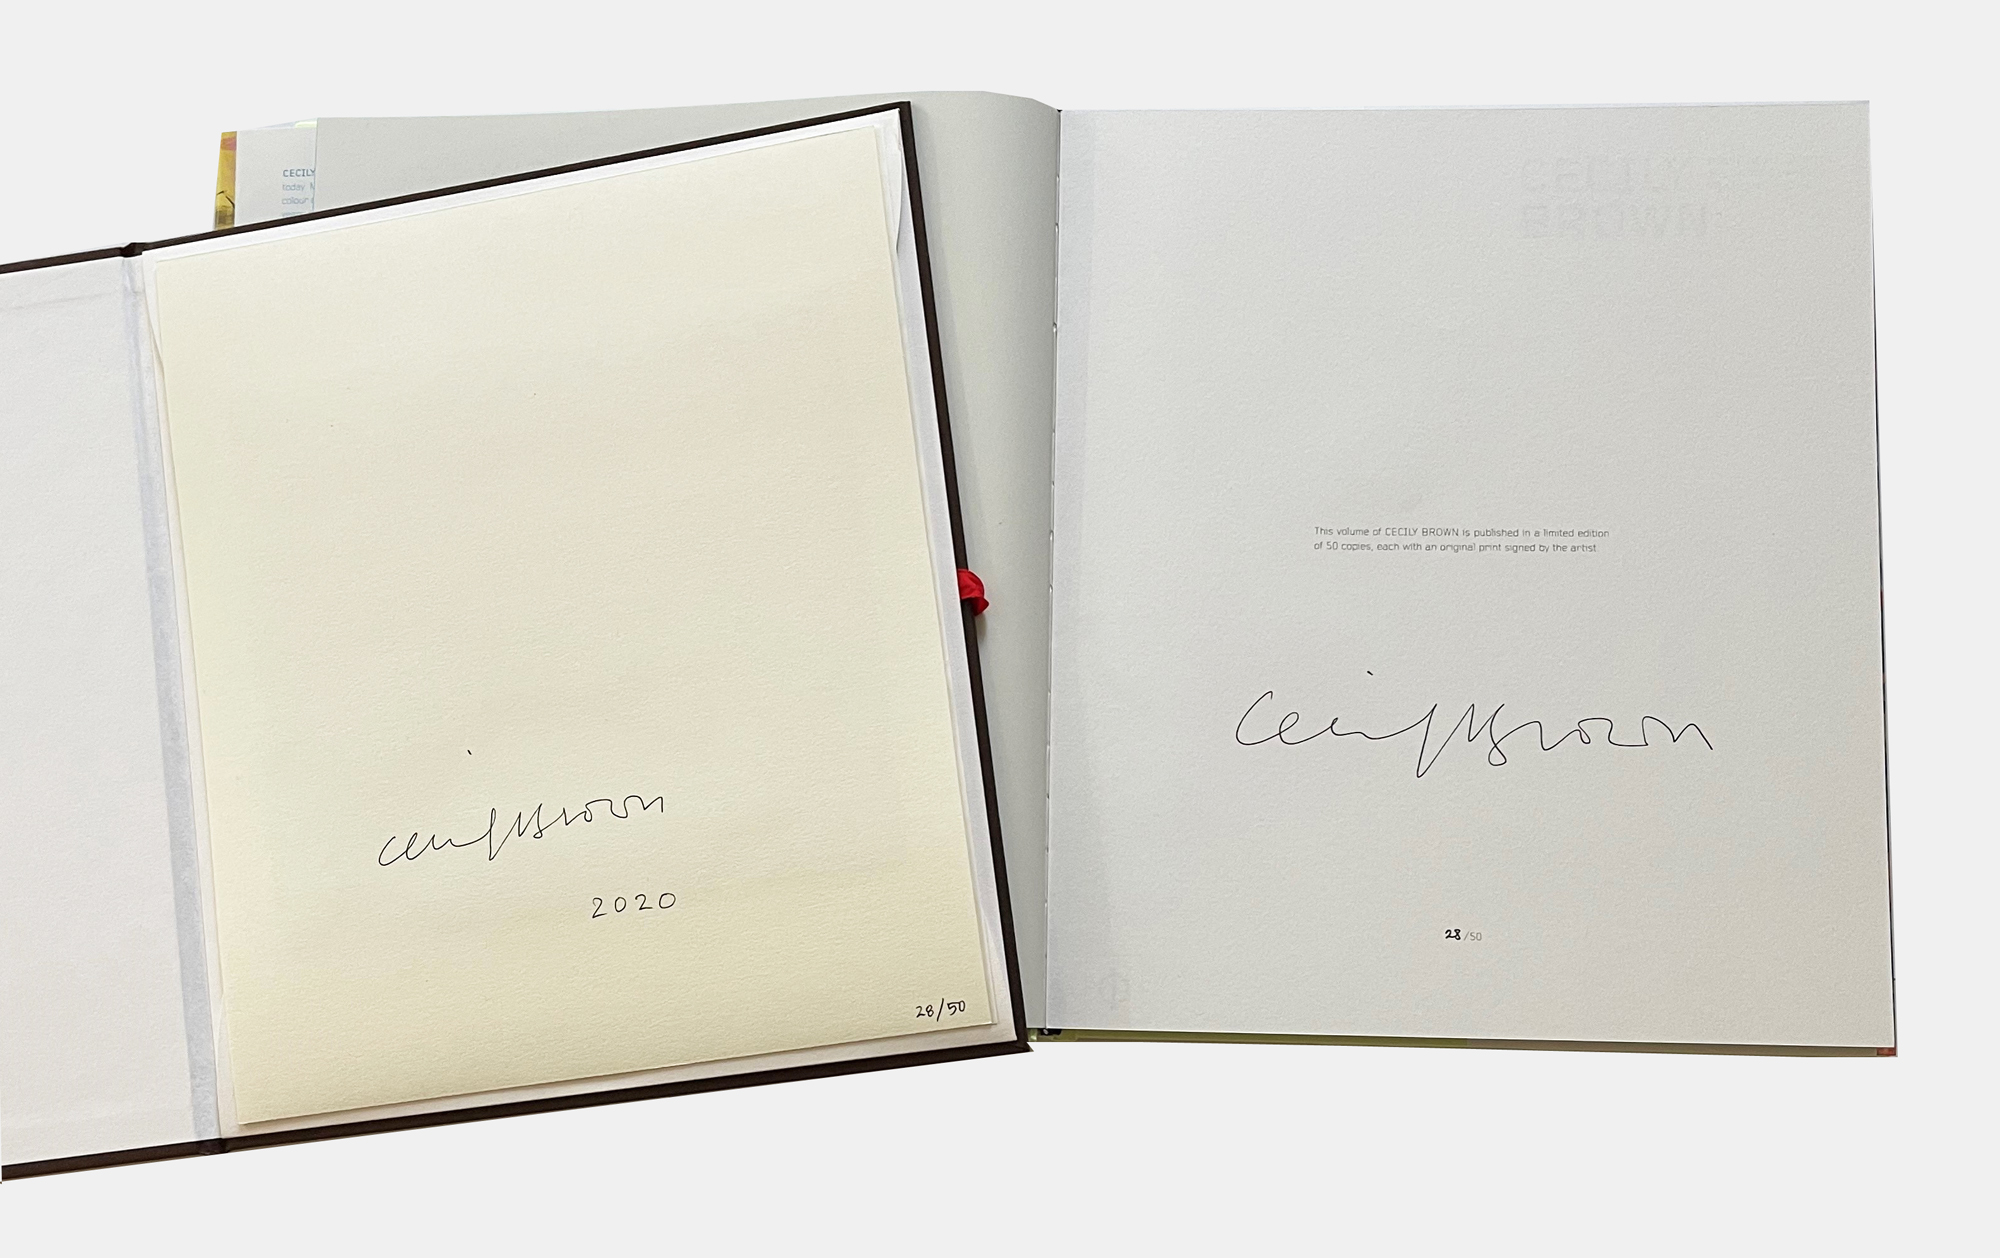 Cecily Brown's signature on the reverse of the edition and in the accompanying Phaidon book